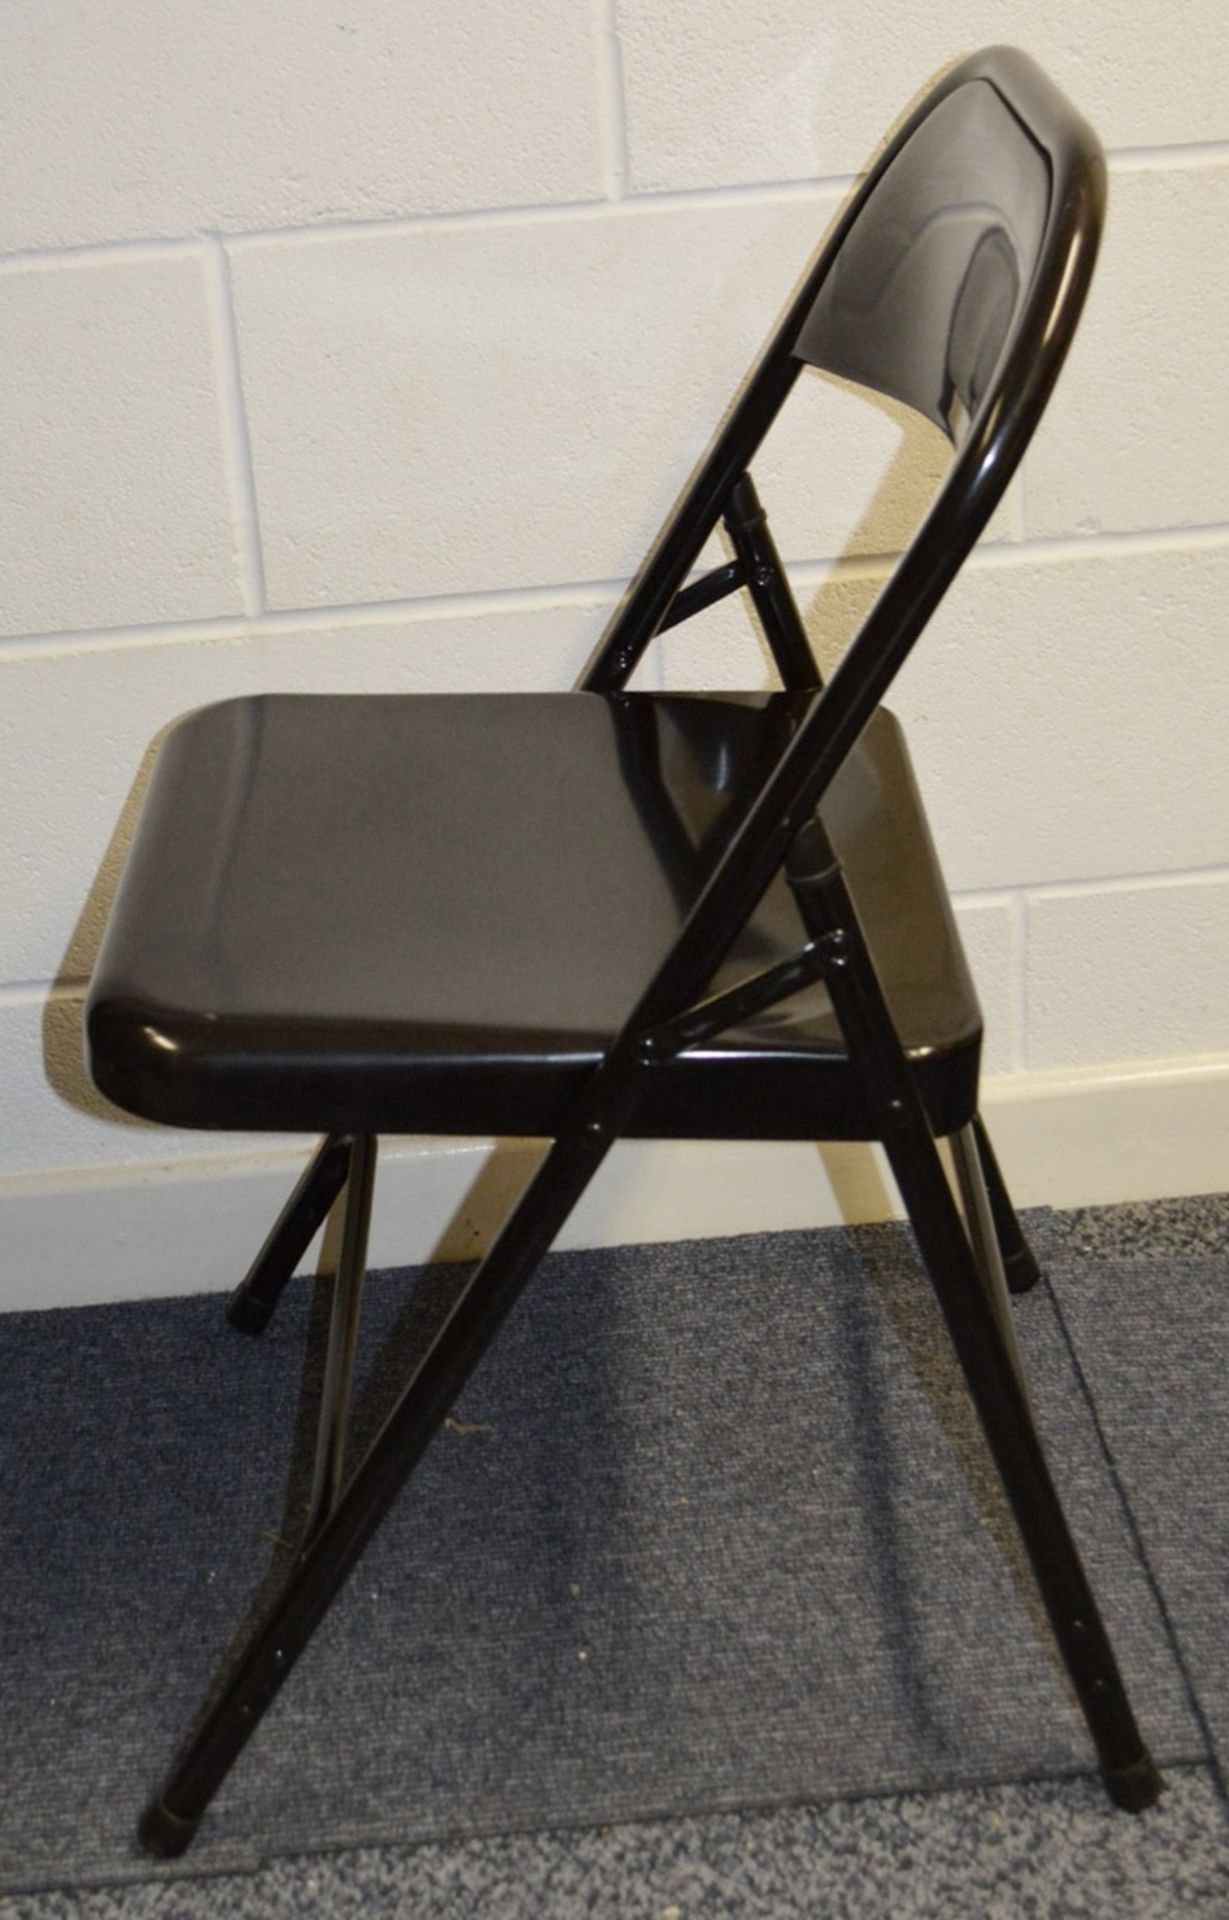 3 x HABITAT Folding Metal Chairs In Black - Dimensions: W47 x D50 x H80, Seat Height cm - Used, In - Image 3 of 4